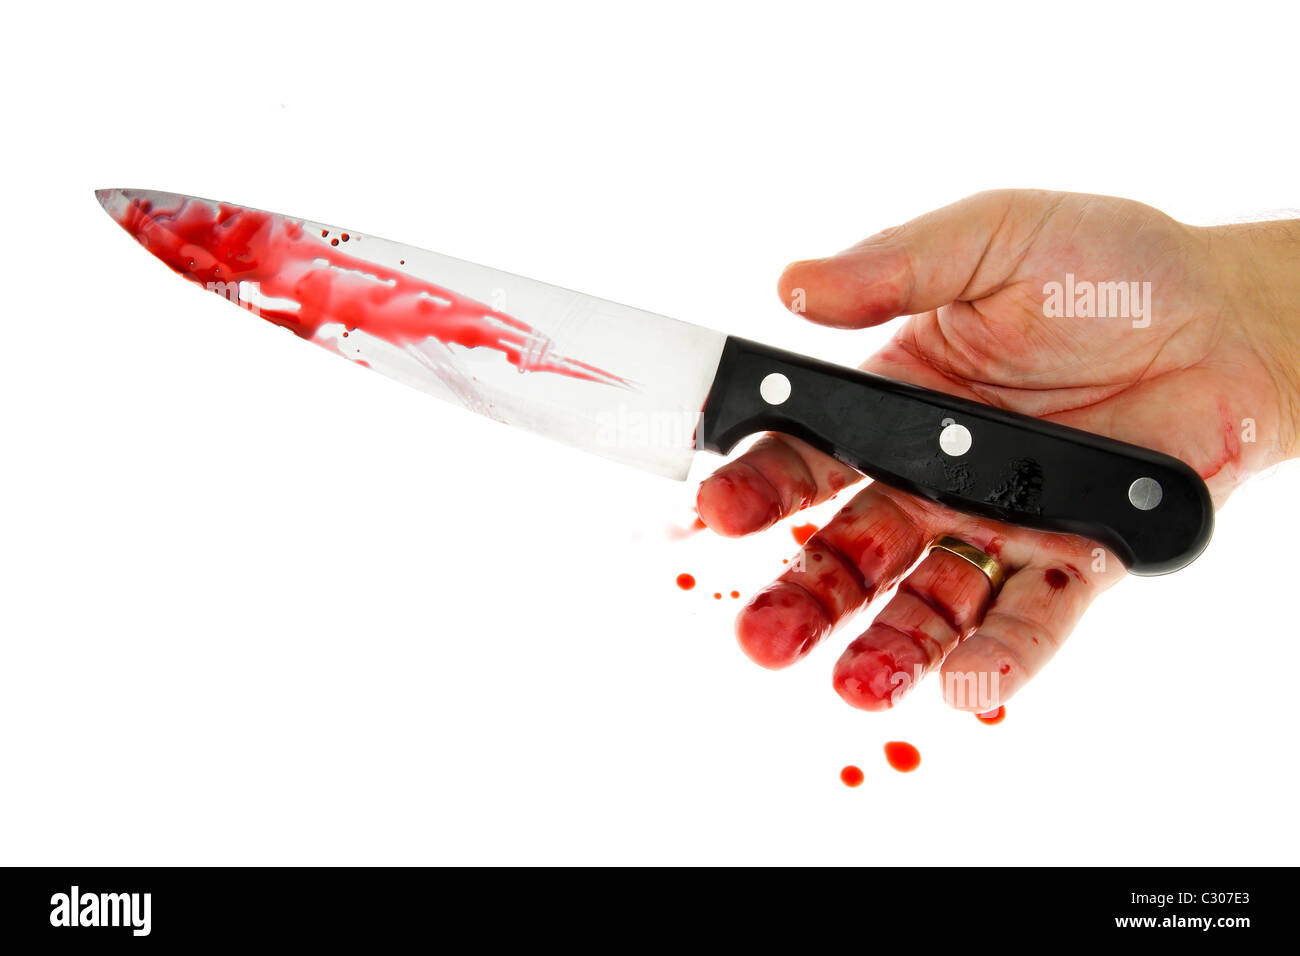 Knife and Blood, crime Stock Photo